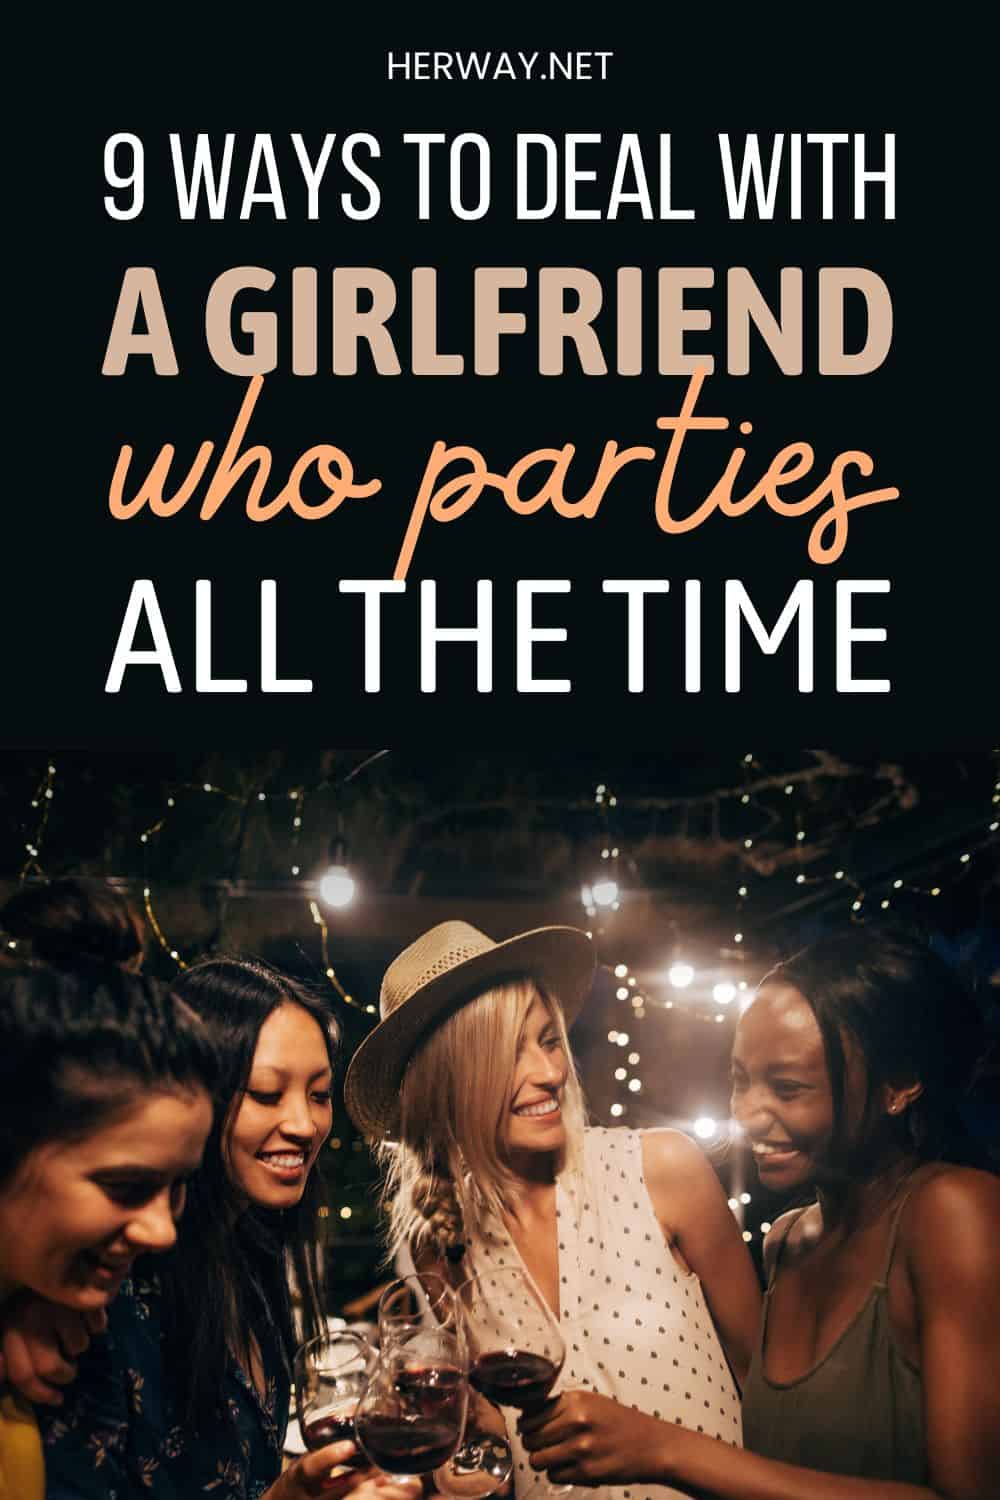 My Girlfriend Likes To Party All The Time (9 Helpful Tips) Pinterest